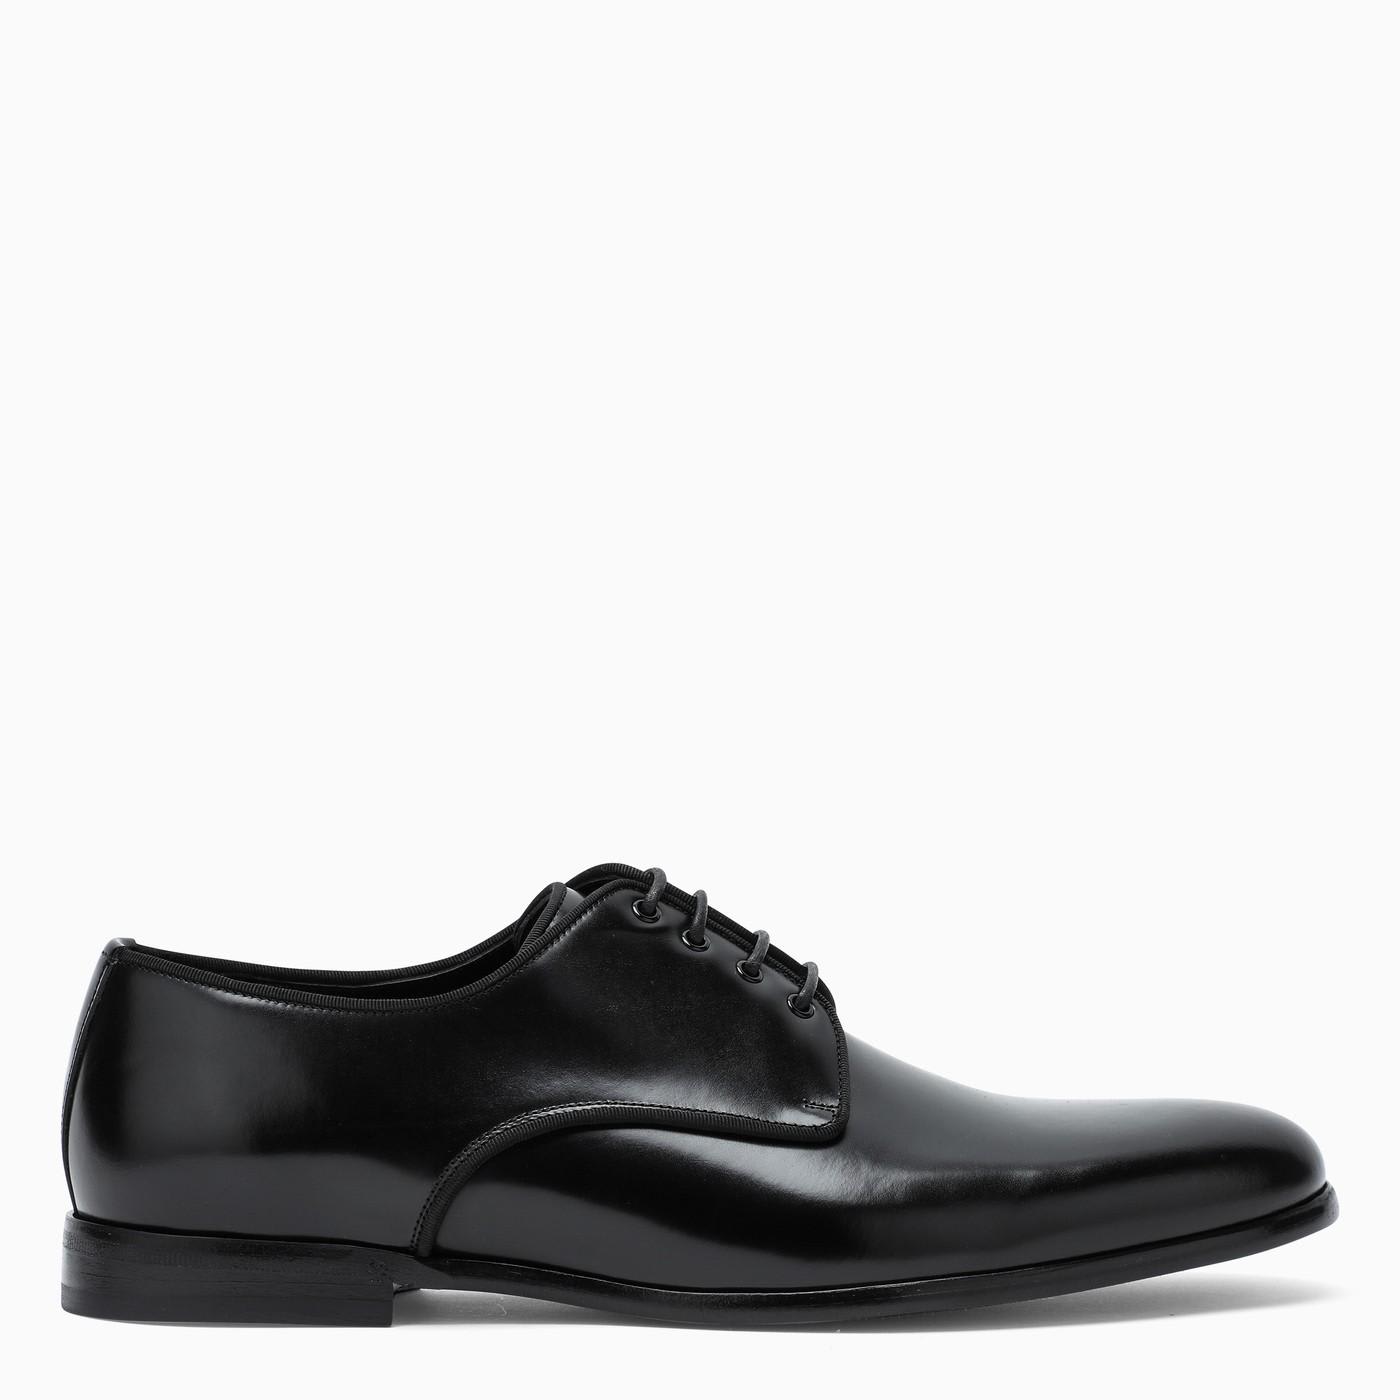 DOLCE & GABBANA DERBY SHOES IN BLACK LEATHER